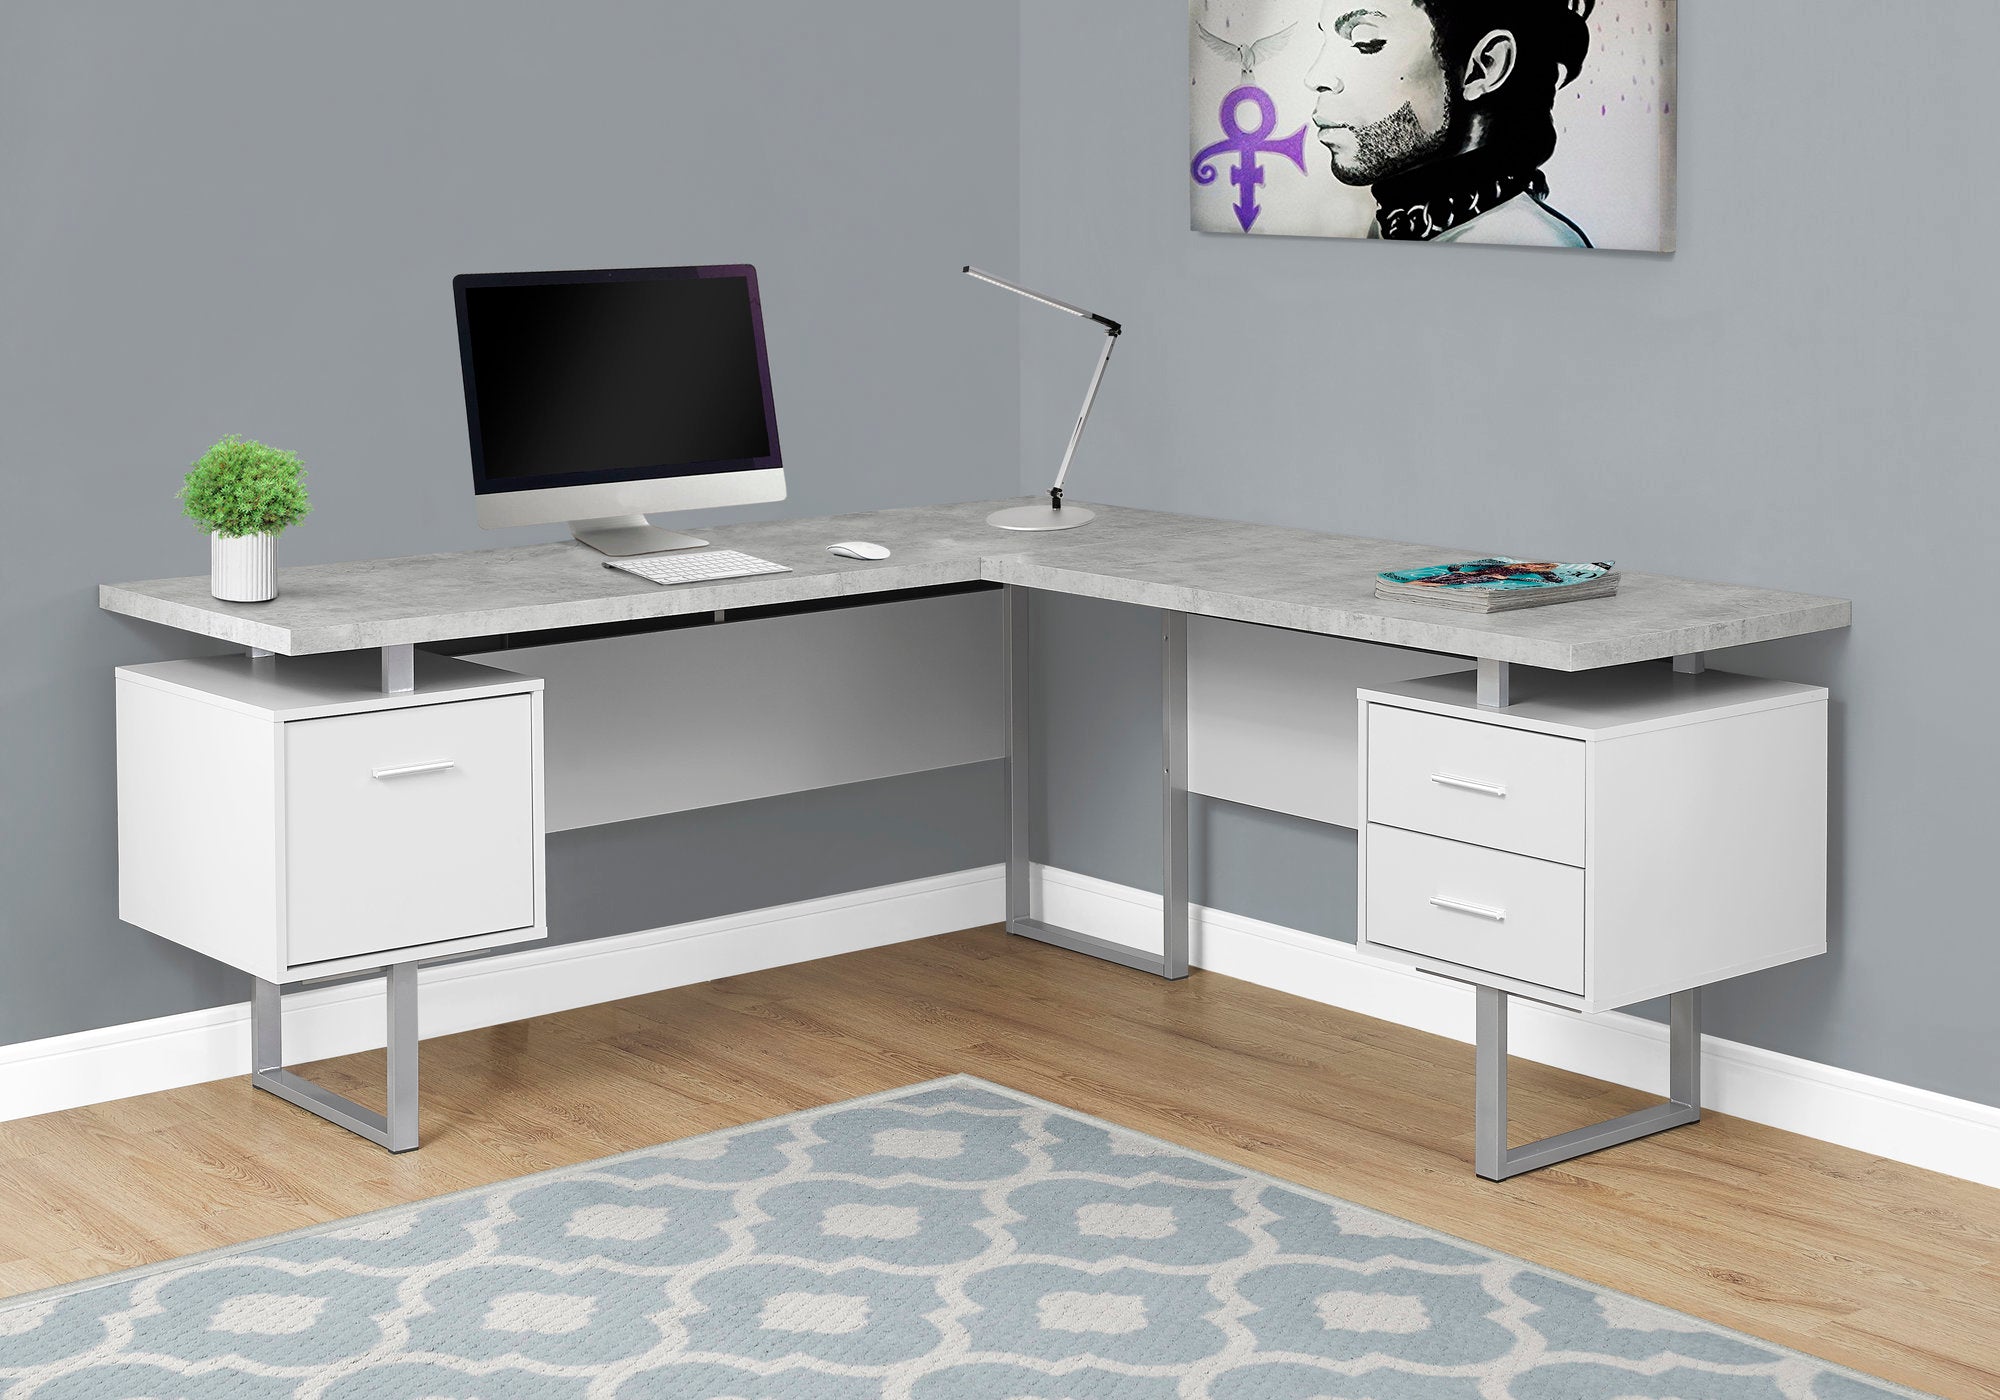 MN-107307    Computer Desk, Home Office, Corner, Left, Right Set-Up, Storage Drawers, 70"L, L Shape, Metal, Laminate, Grey Cement Look, Grey, Contemporary, Modern